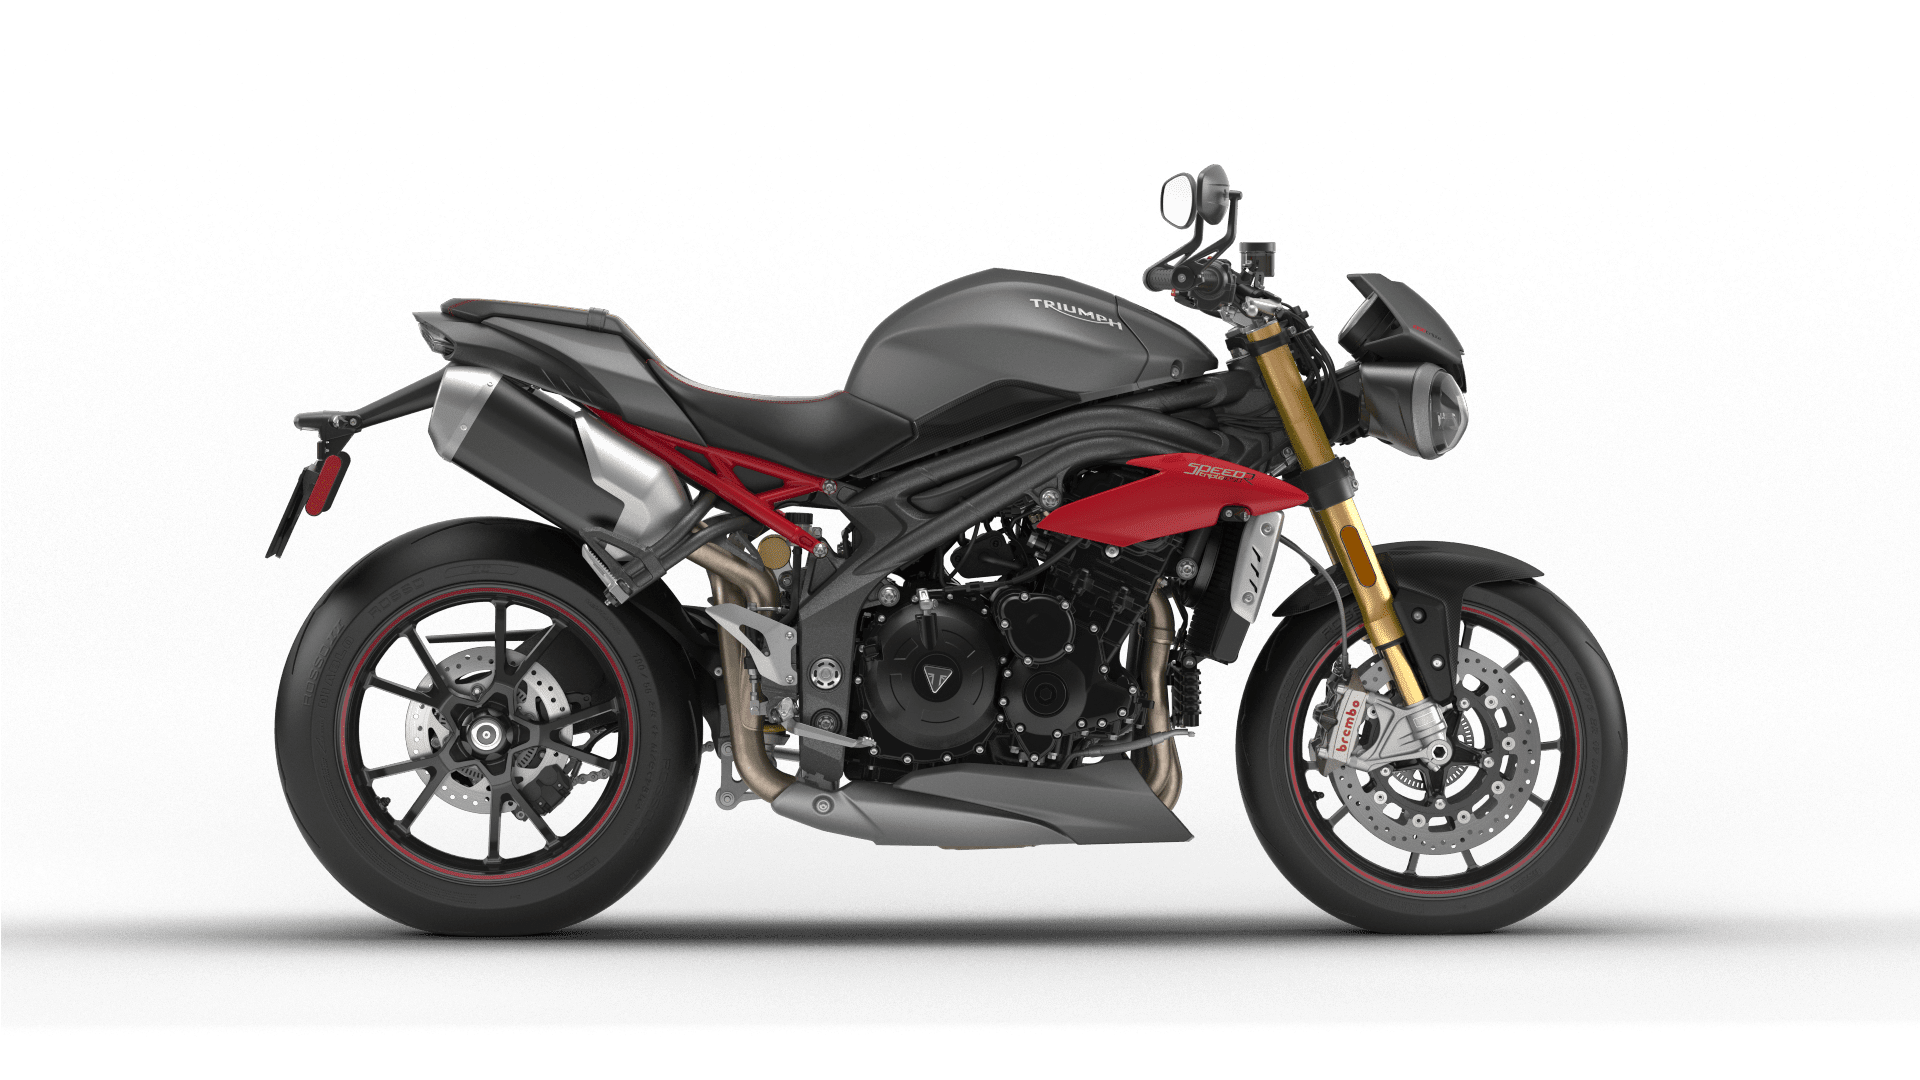 https://media.triumphmotorcycles.co.uk/image/upload/f_auto/q_auto/sitecoremedialibrary/media-library/images/configurator/roadsters/speed%20triple/nn4/rhs/nn4_my15_speed_triple_r_ls_rhs.png?w=640&h=400&crop=1